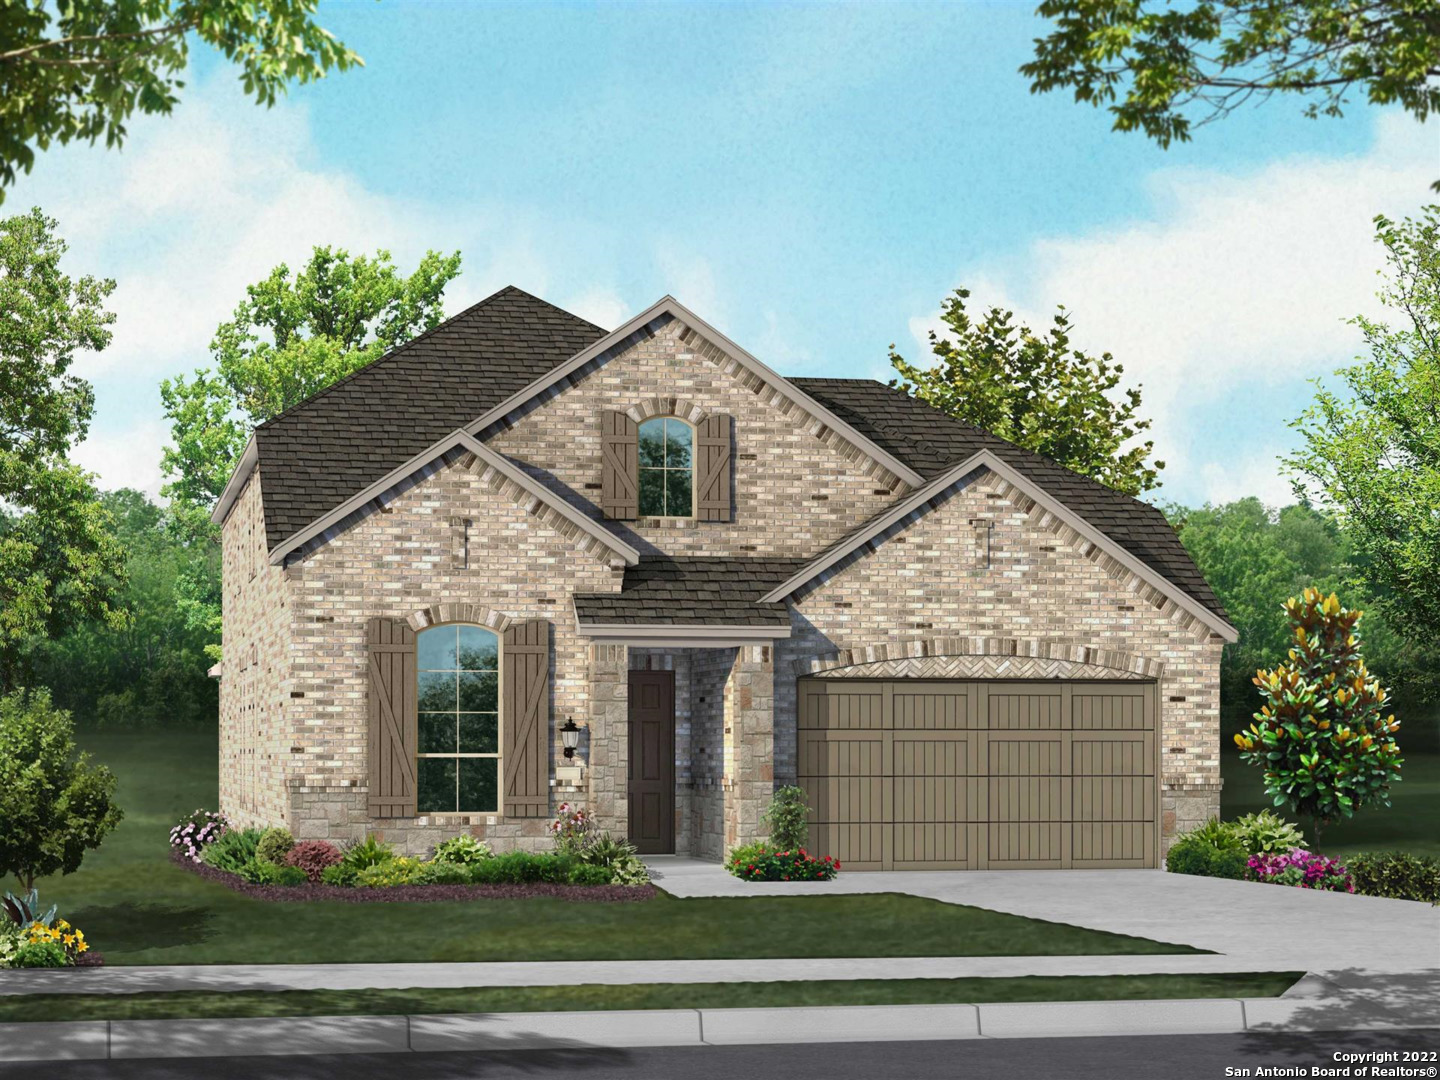 MLS# 1594125 - Built by Highland Homes - August completion! ~ 5 BEDROOM, 3 FULL BATHS. StoneBrick exterior design. OVERSIZED homesite with LARGE Outdoor Living space. Great location to 1604. One of THREE remaining homes at Fronterra at Westpointe. Contact ASAP for private showing.